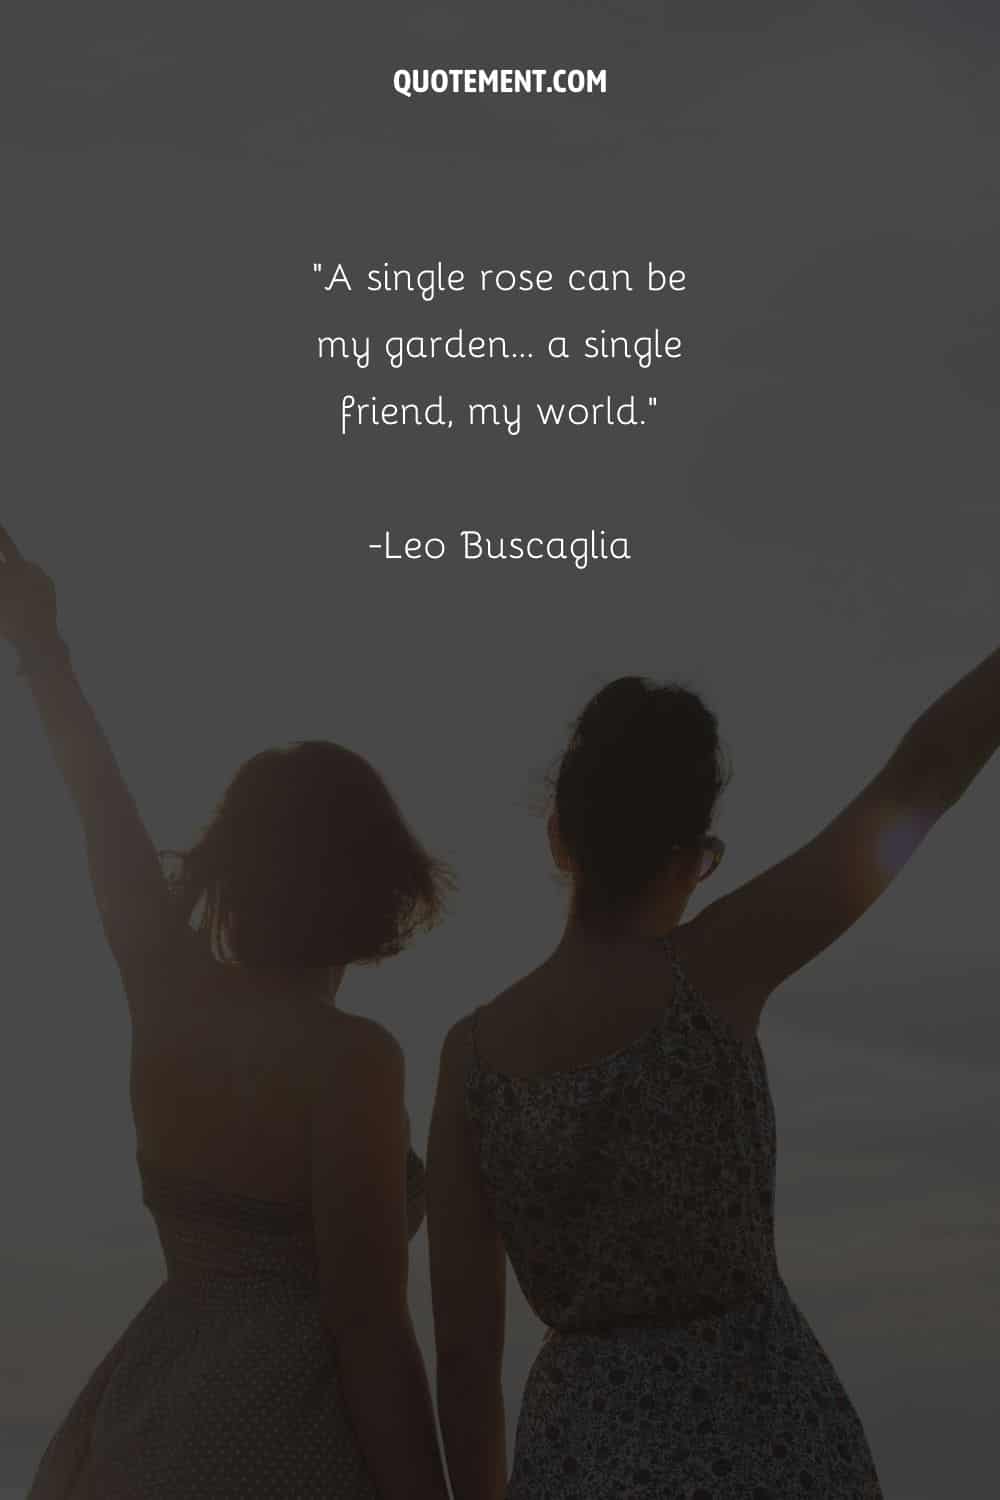 Image of two girls standing together representing a quote about friends
